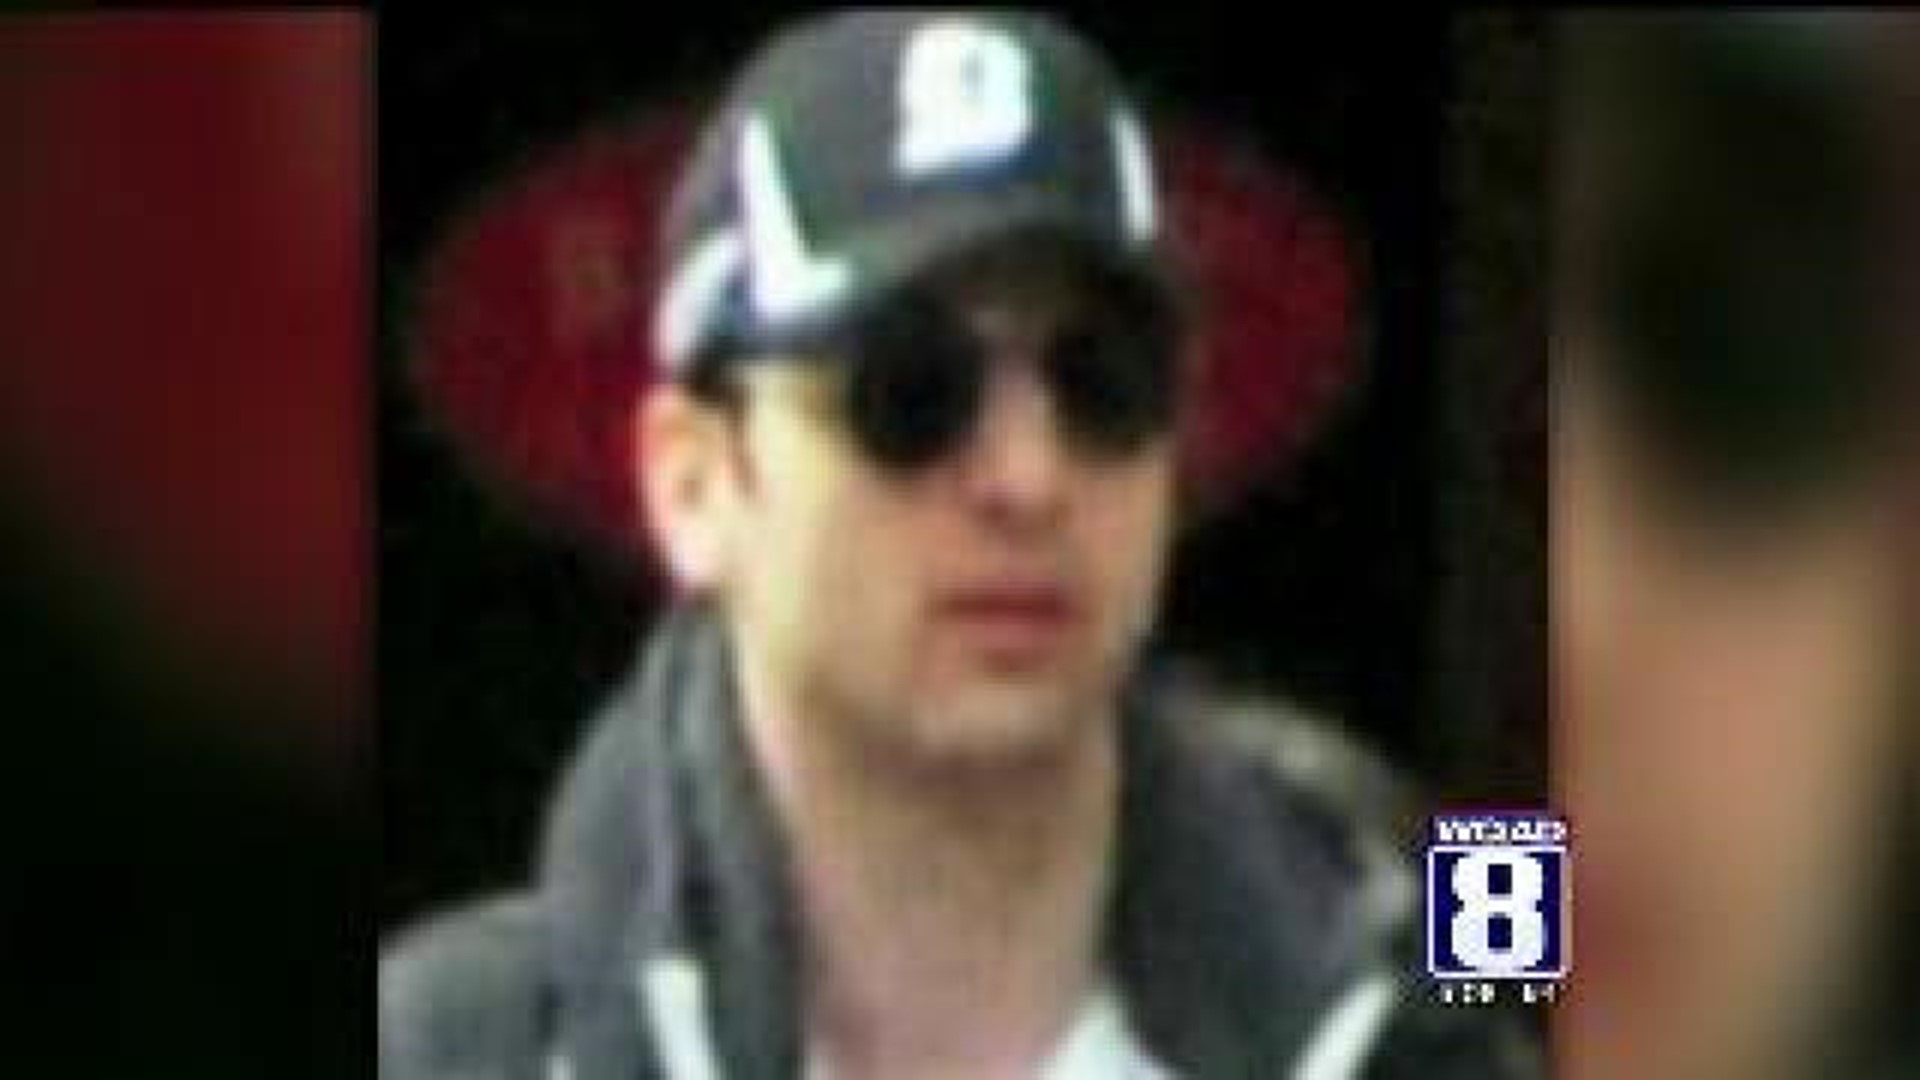 Resting place found for Boston bombing suspect